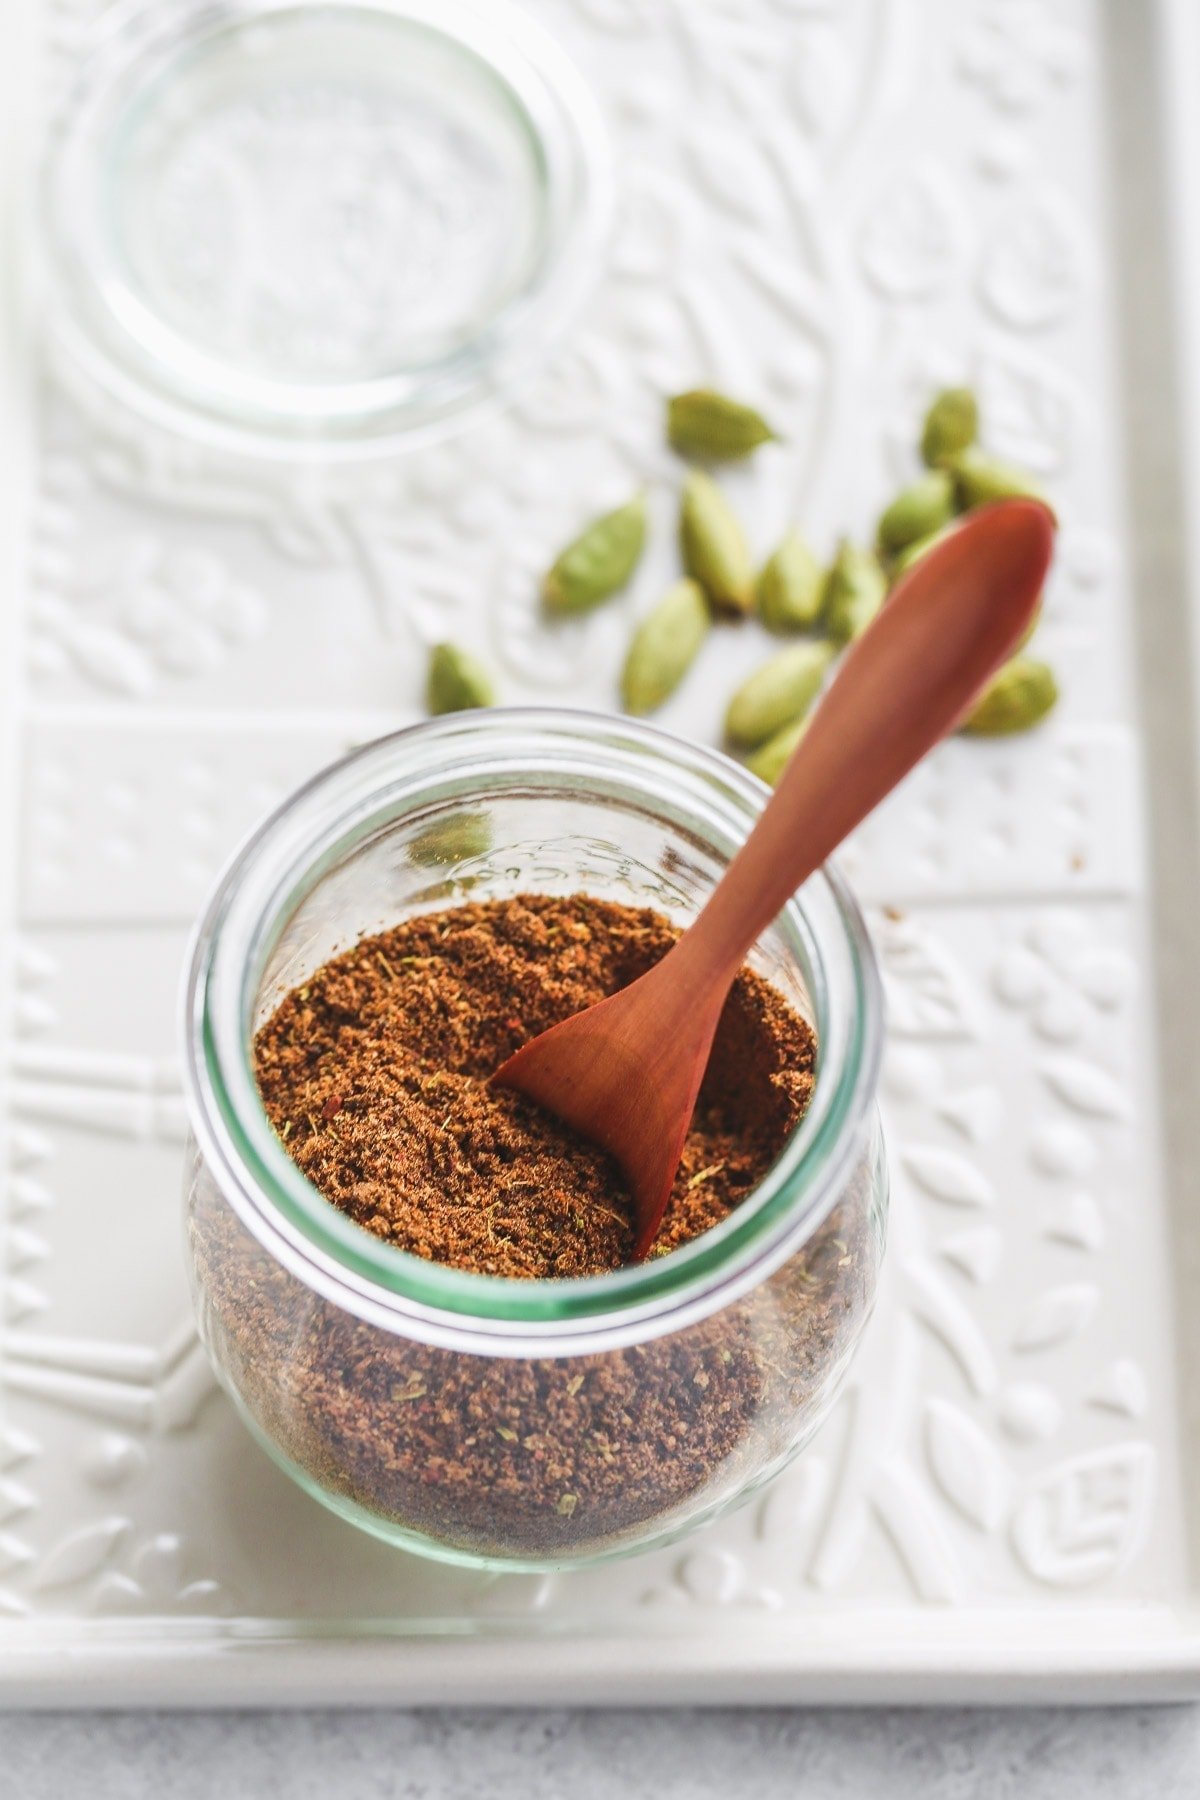 A Weck jar filled with baharat spice blend and a wooden teaspoon, cardamom pods on a white tray.